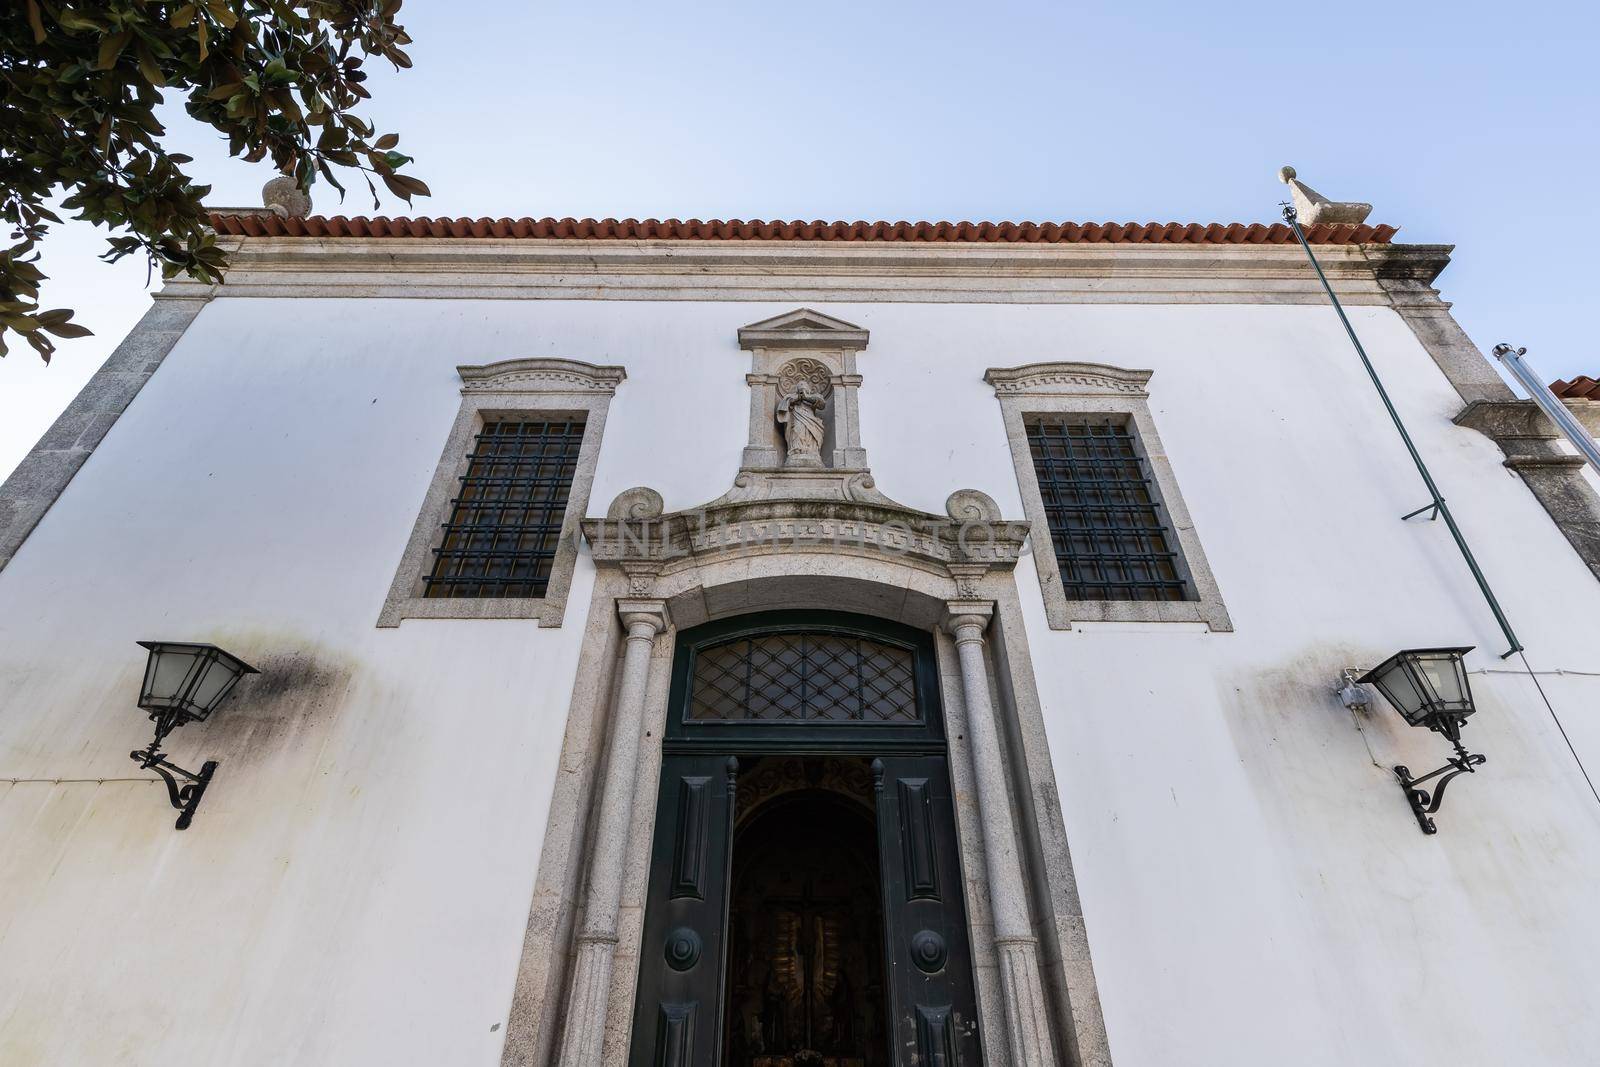 Architectural detail of the Church of Mercy in Esposende, Portugal by AtlanticEUROSTOXX